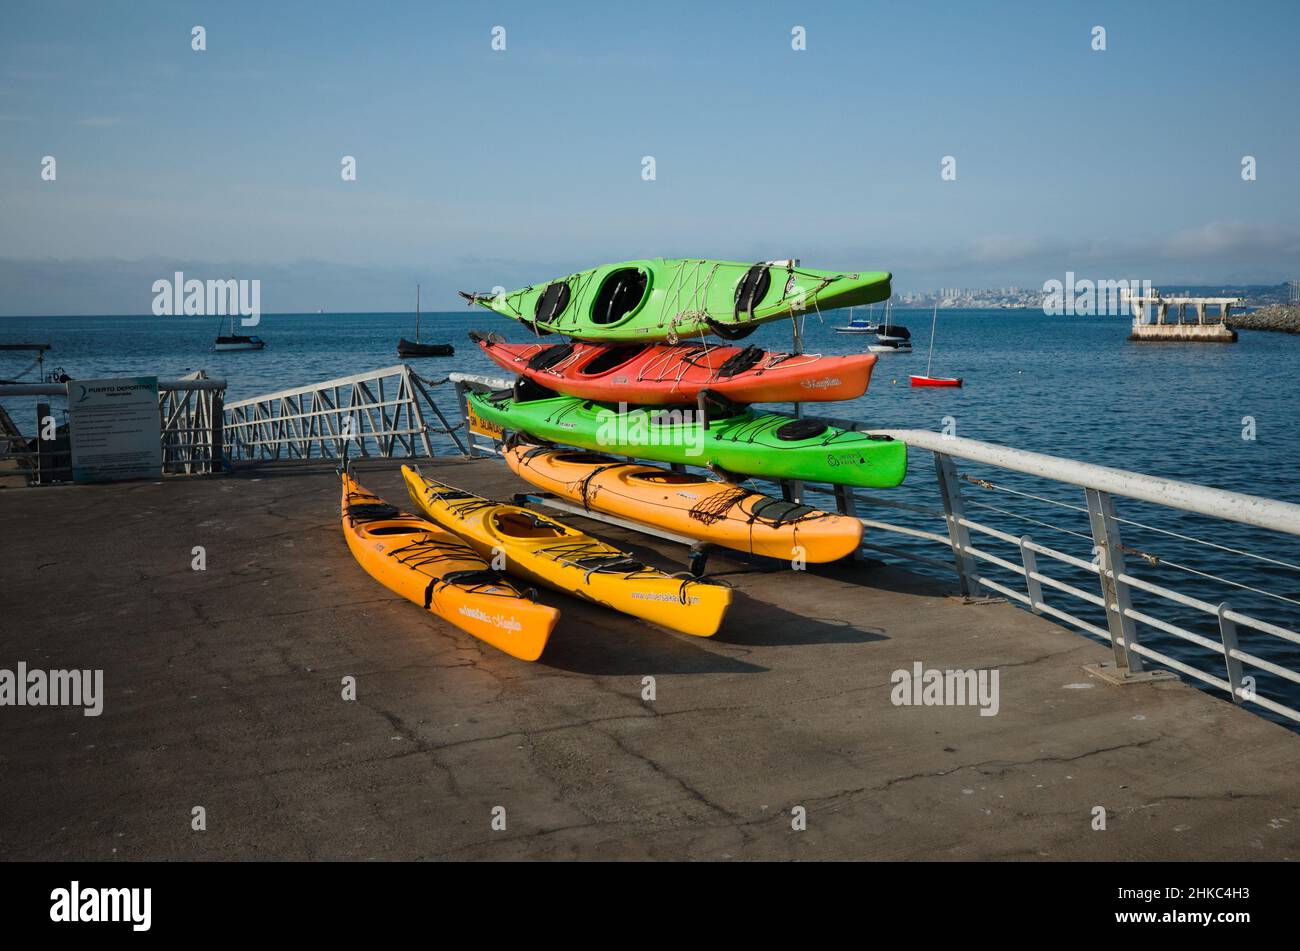 Valparaiso, Chile - February, 2020: Several colorful kayaks stacked on Muelle Baron pier in Bahia de Valparaiso bay of Pacific ocean. Stock Photo